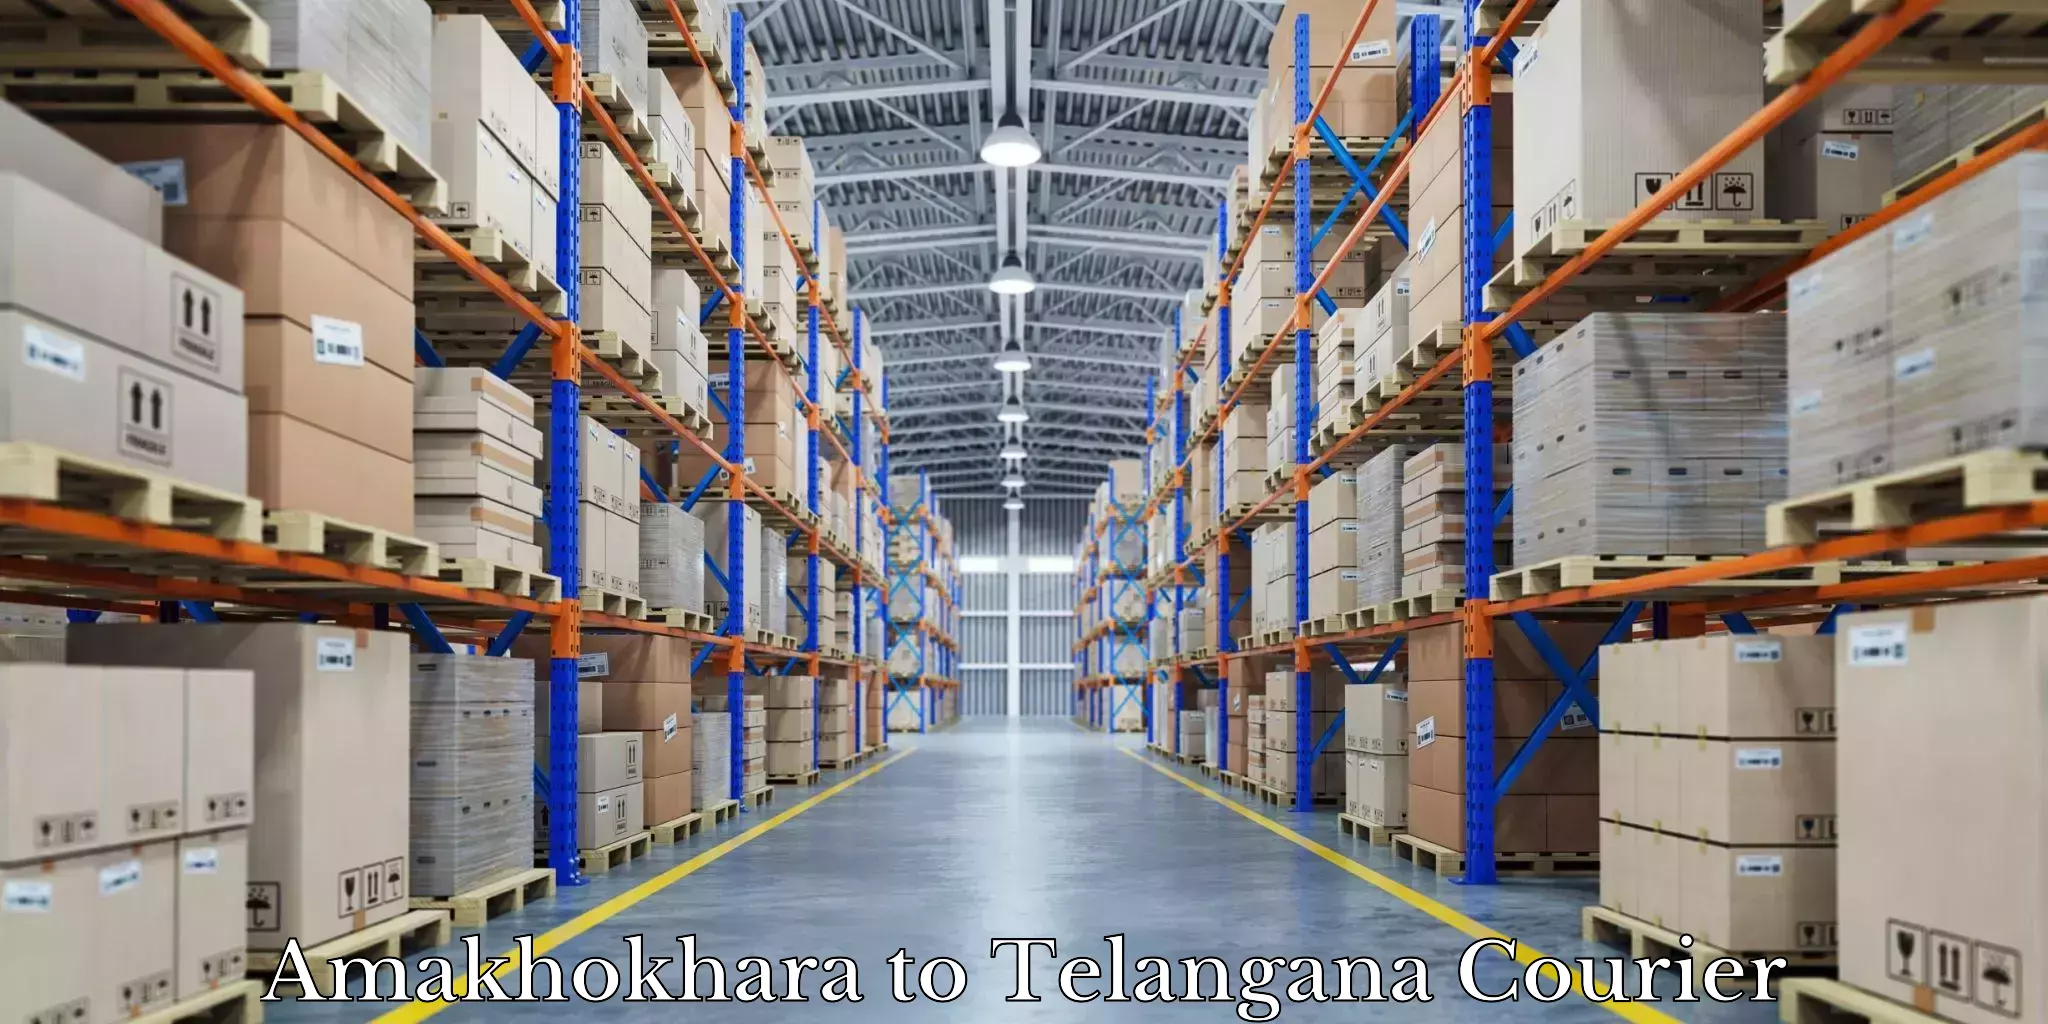 Trusted relocation services Amakhokhara to Gangadhara